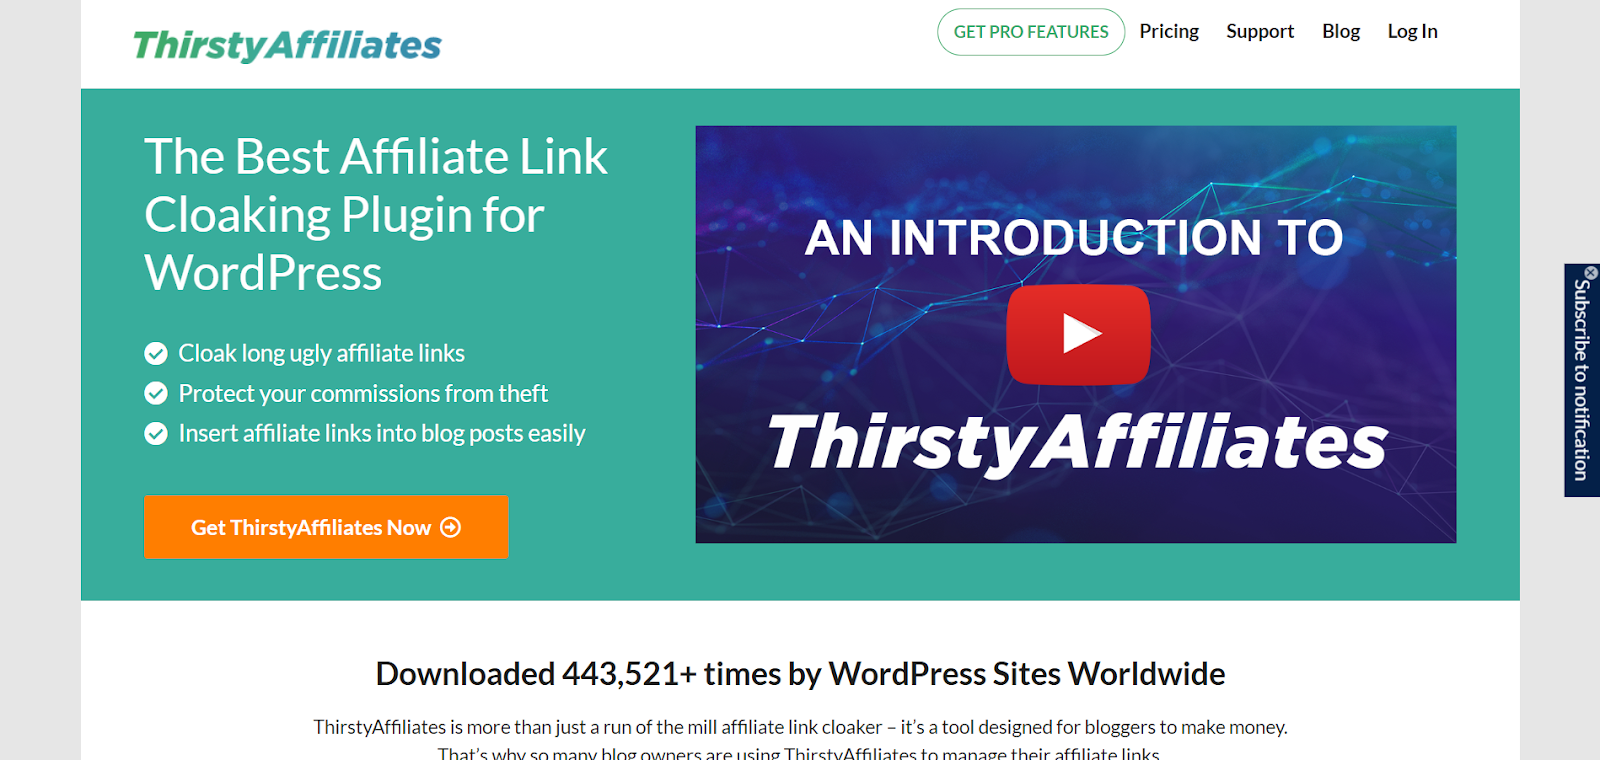 Thirsty Affiliates main page